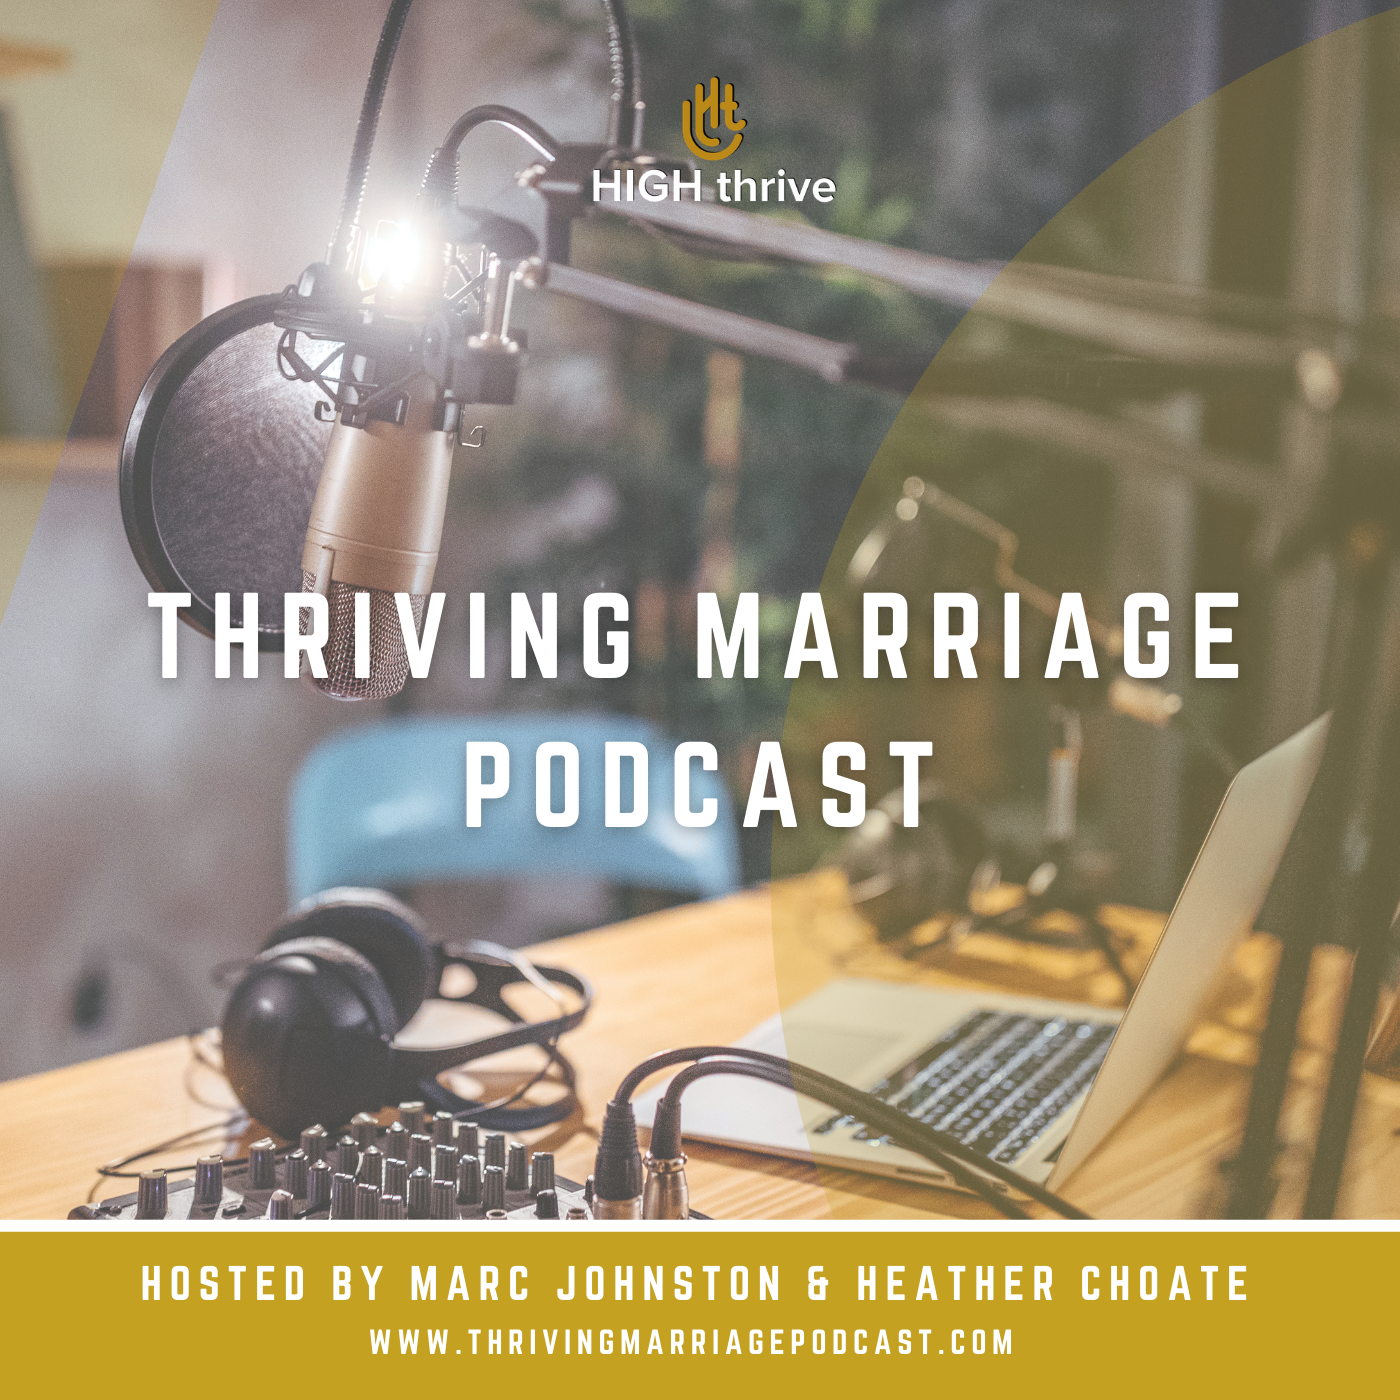 Episode 10: Interview with Ferrin Williams “My Marriage Journey”